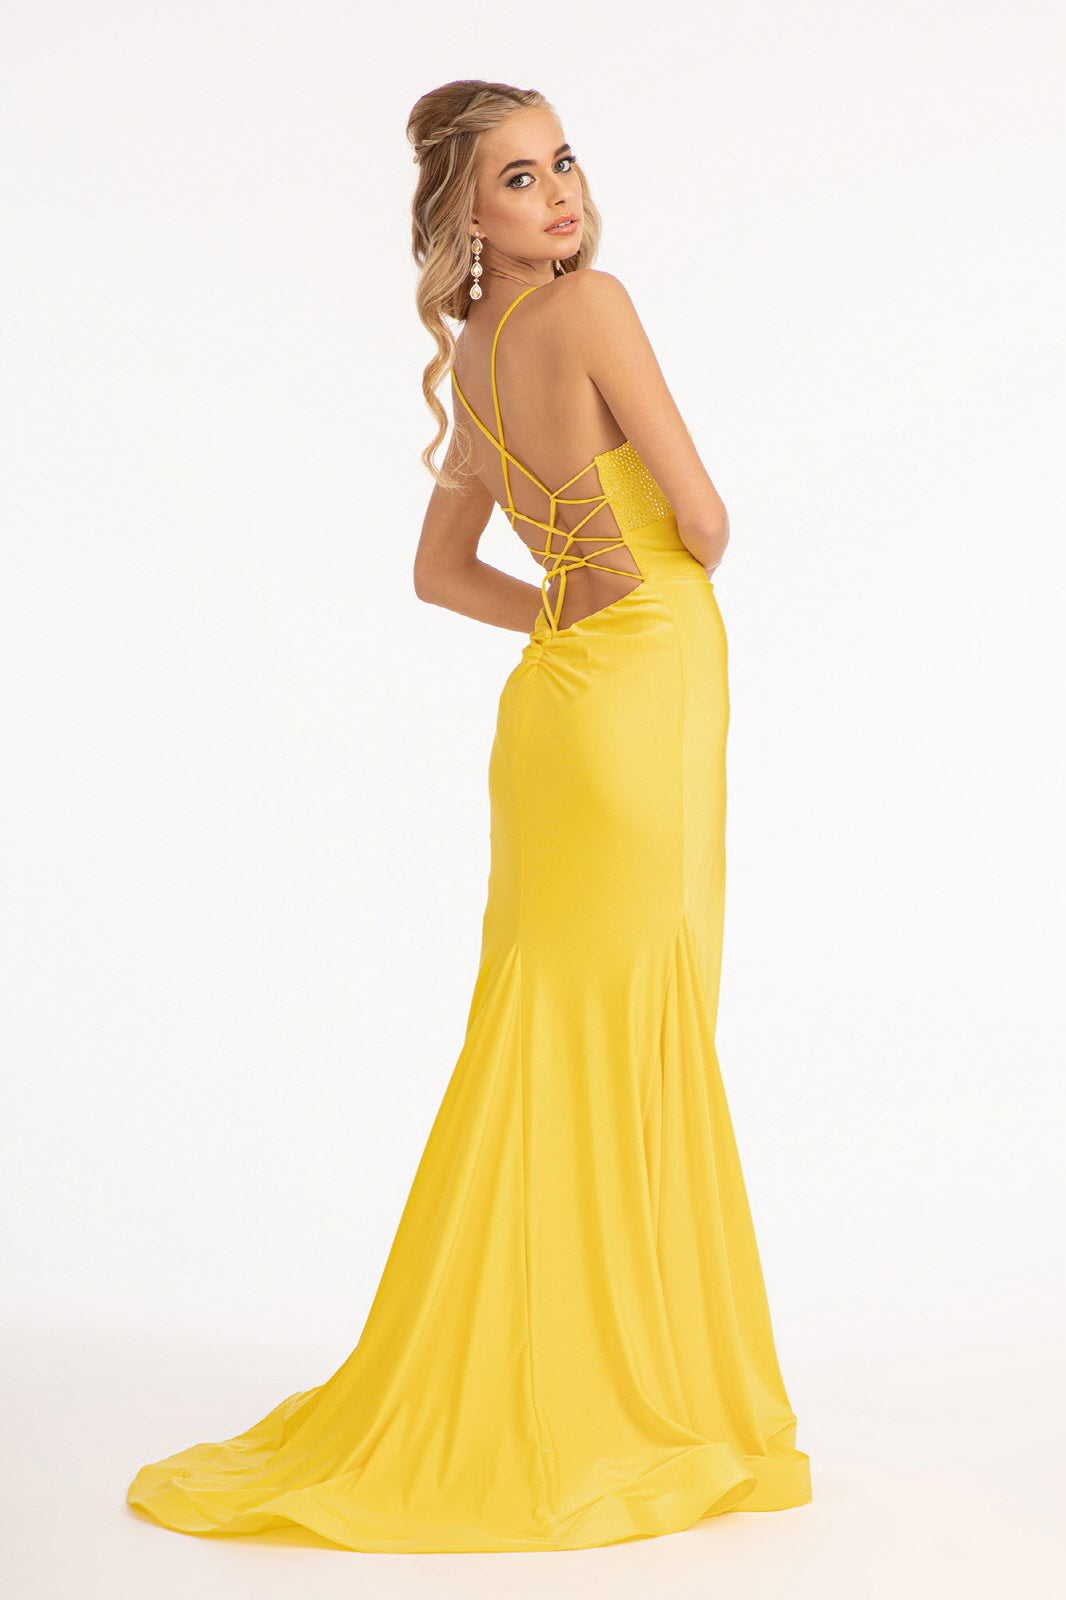 Fitted Lace-Up Jersey Gown by Elizabeth K GL3035